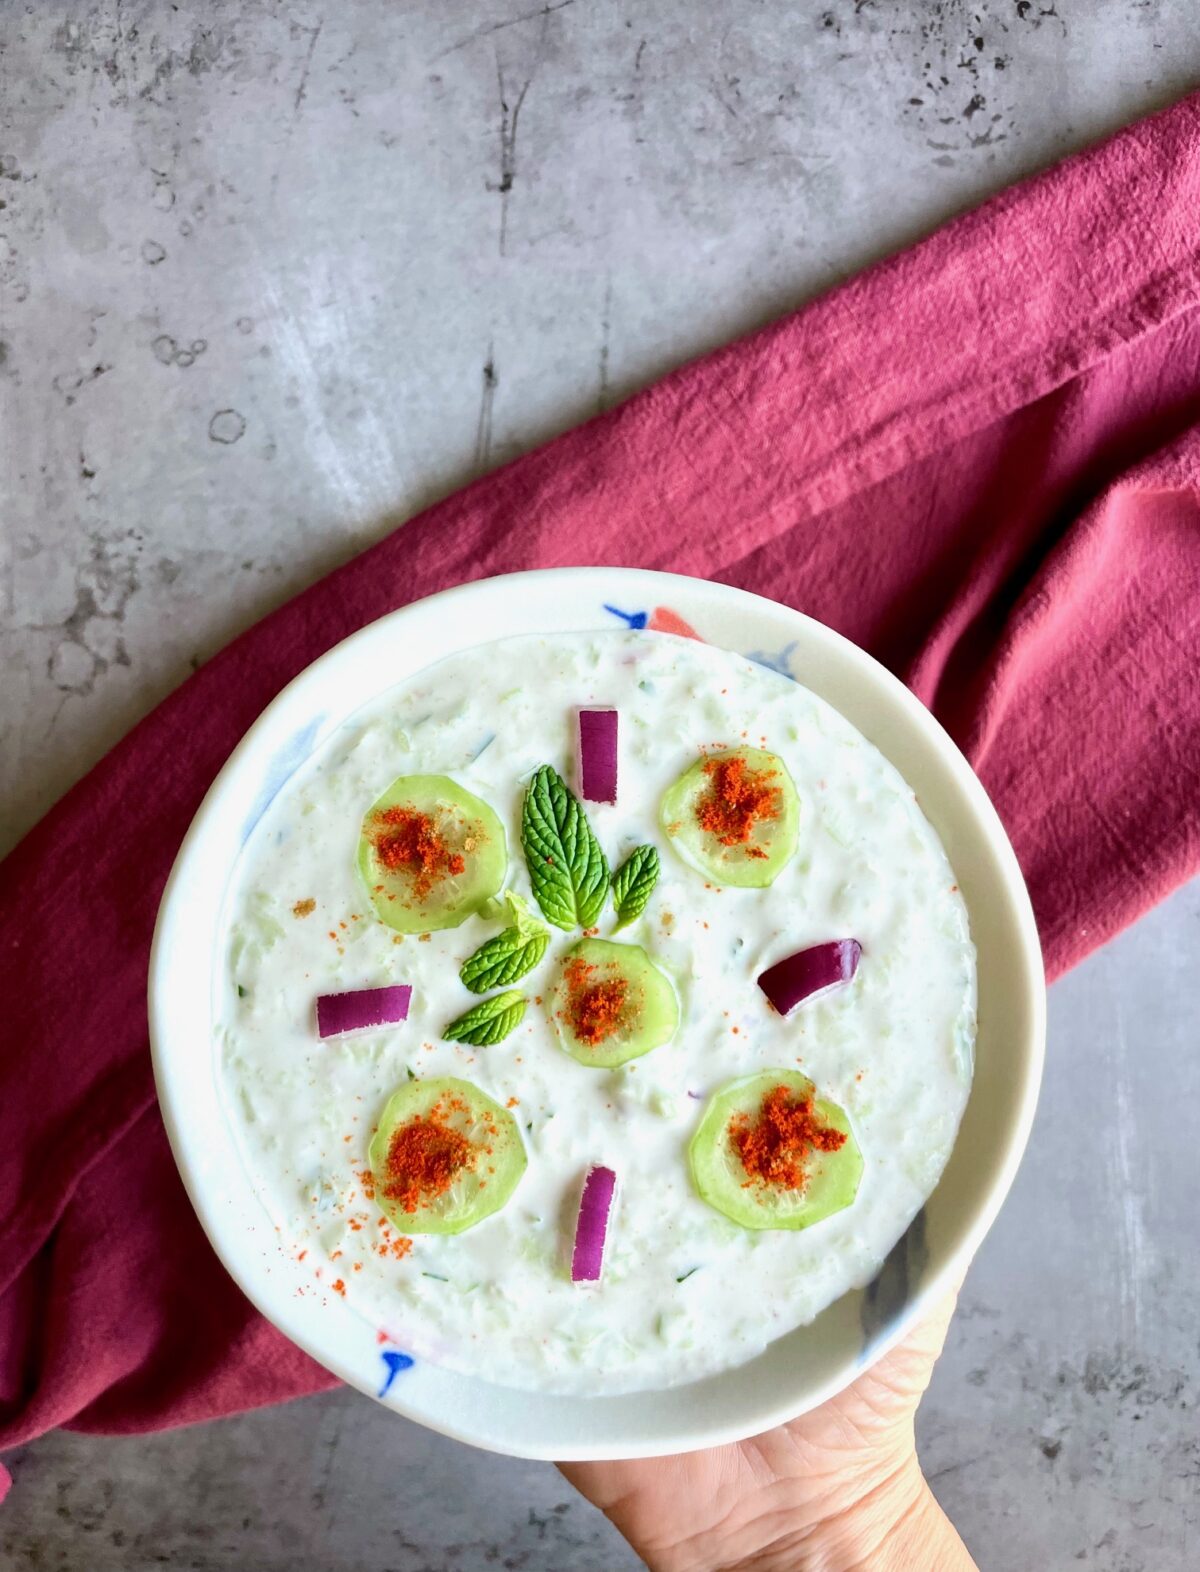 Cucumber raita with red onion, mint leaves and cucumber slices in a bowl. Bowl is being held by a hand.